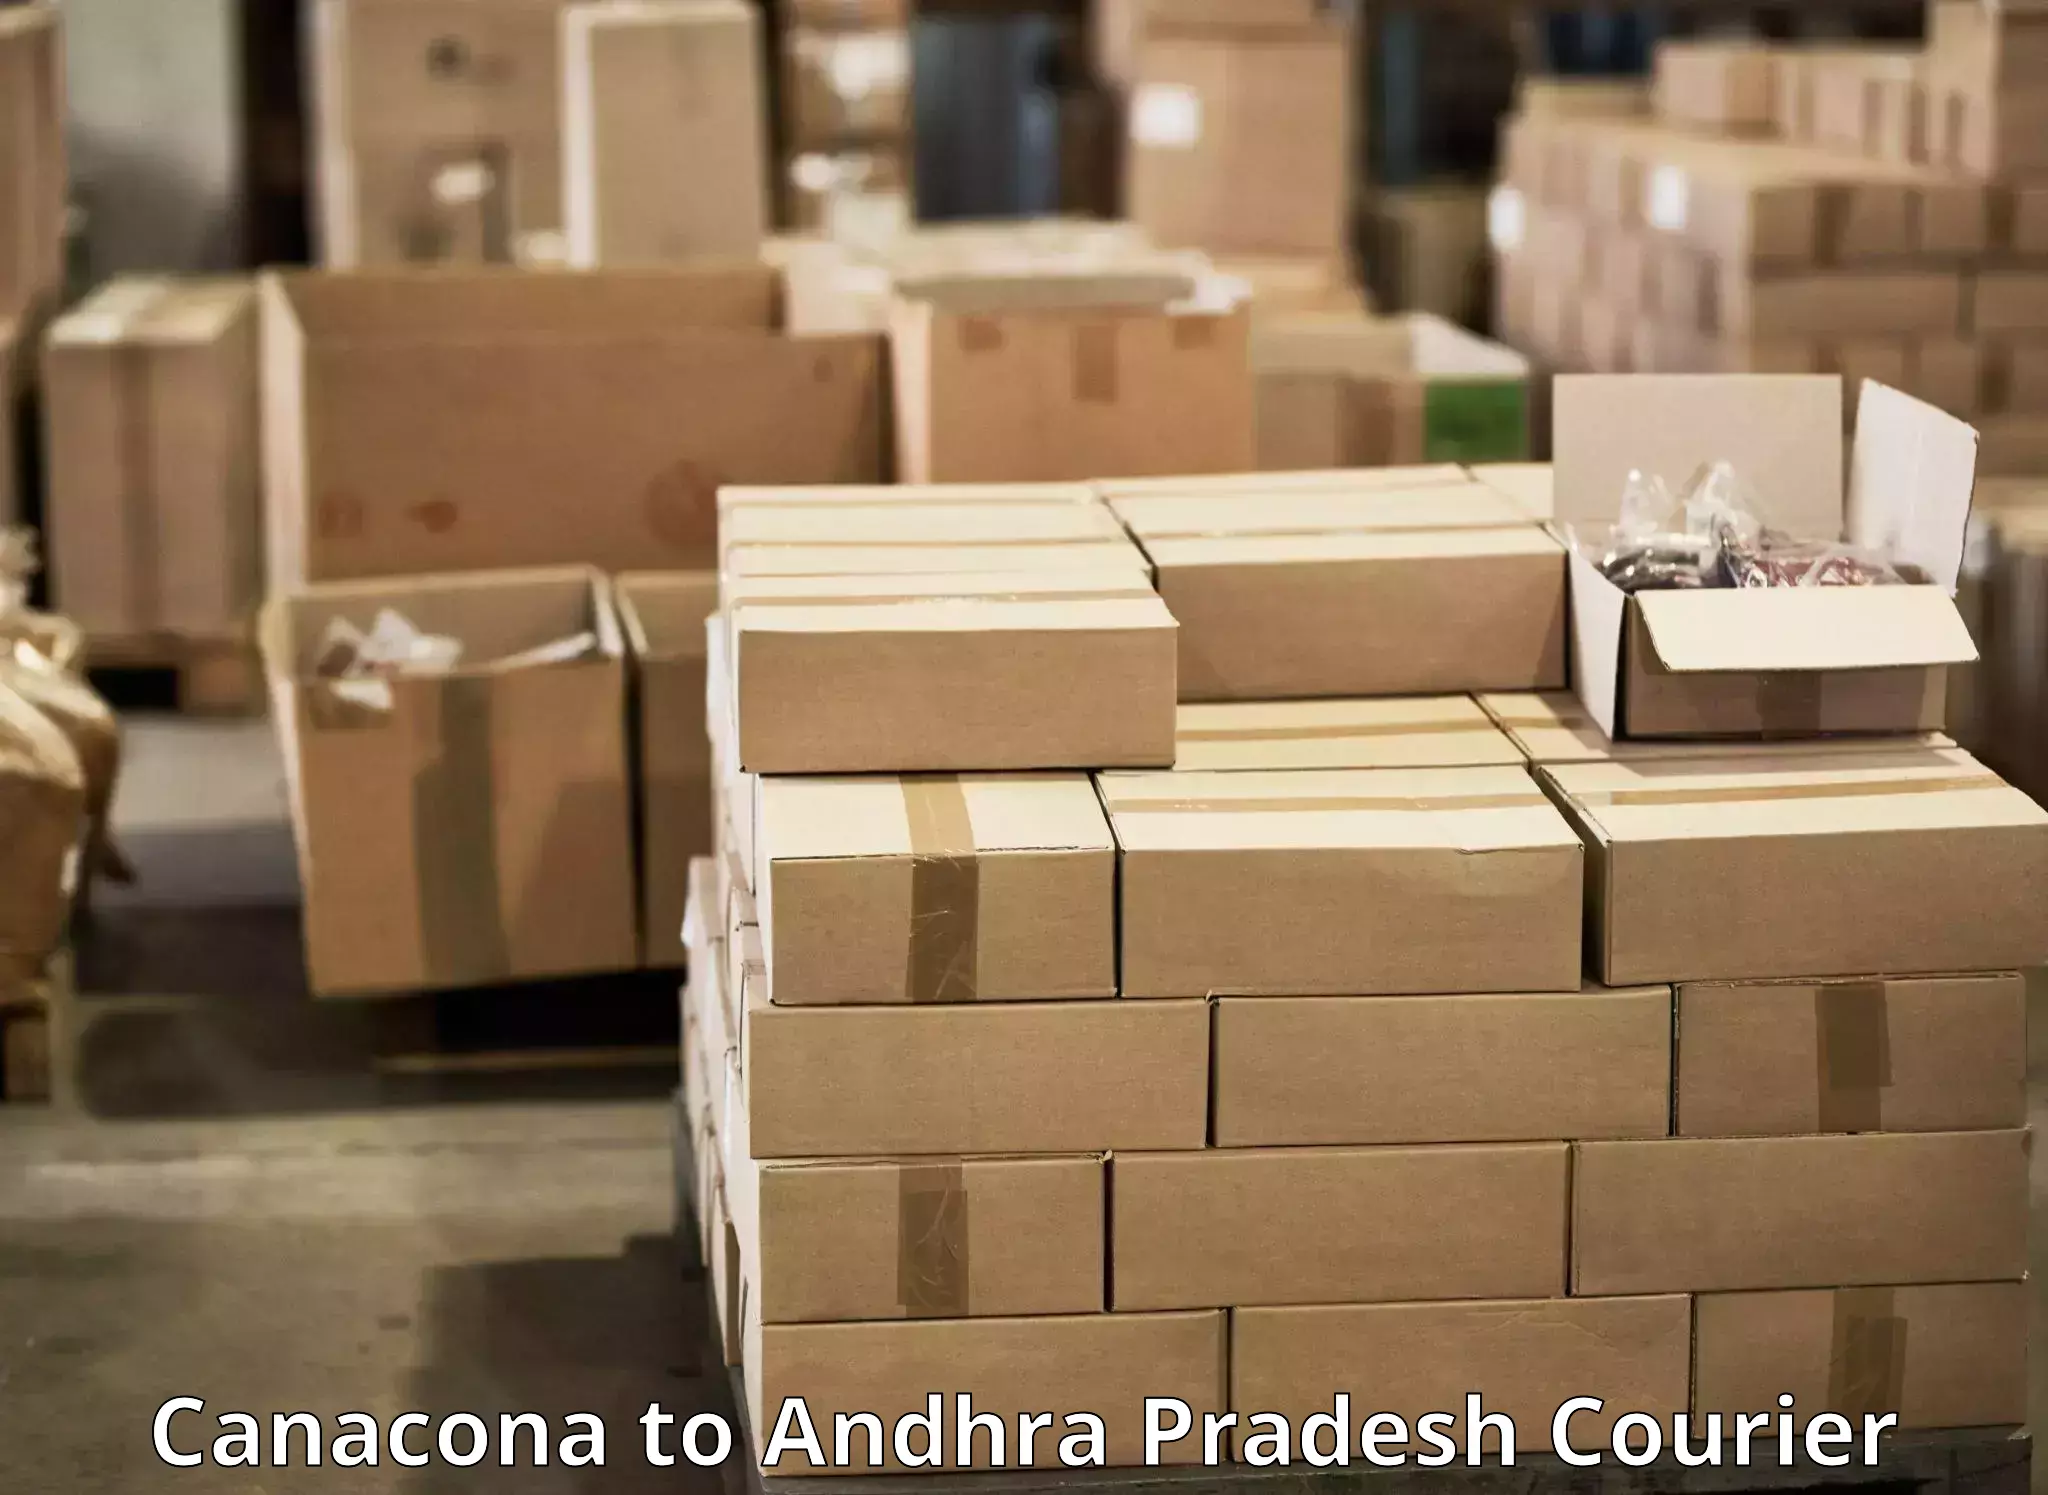 Courier service efficiency Canacona to Kuppam